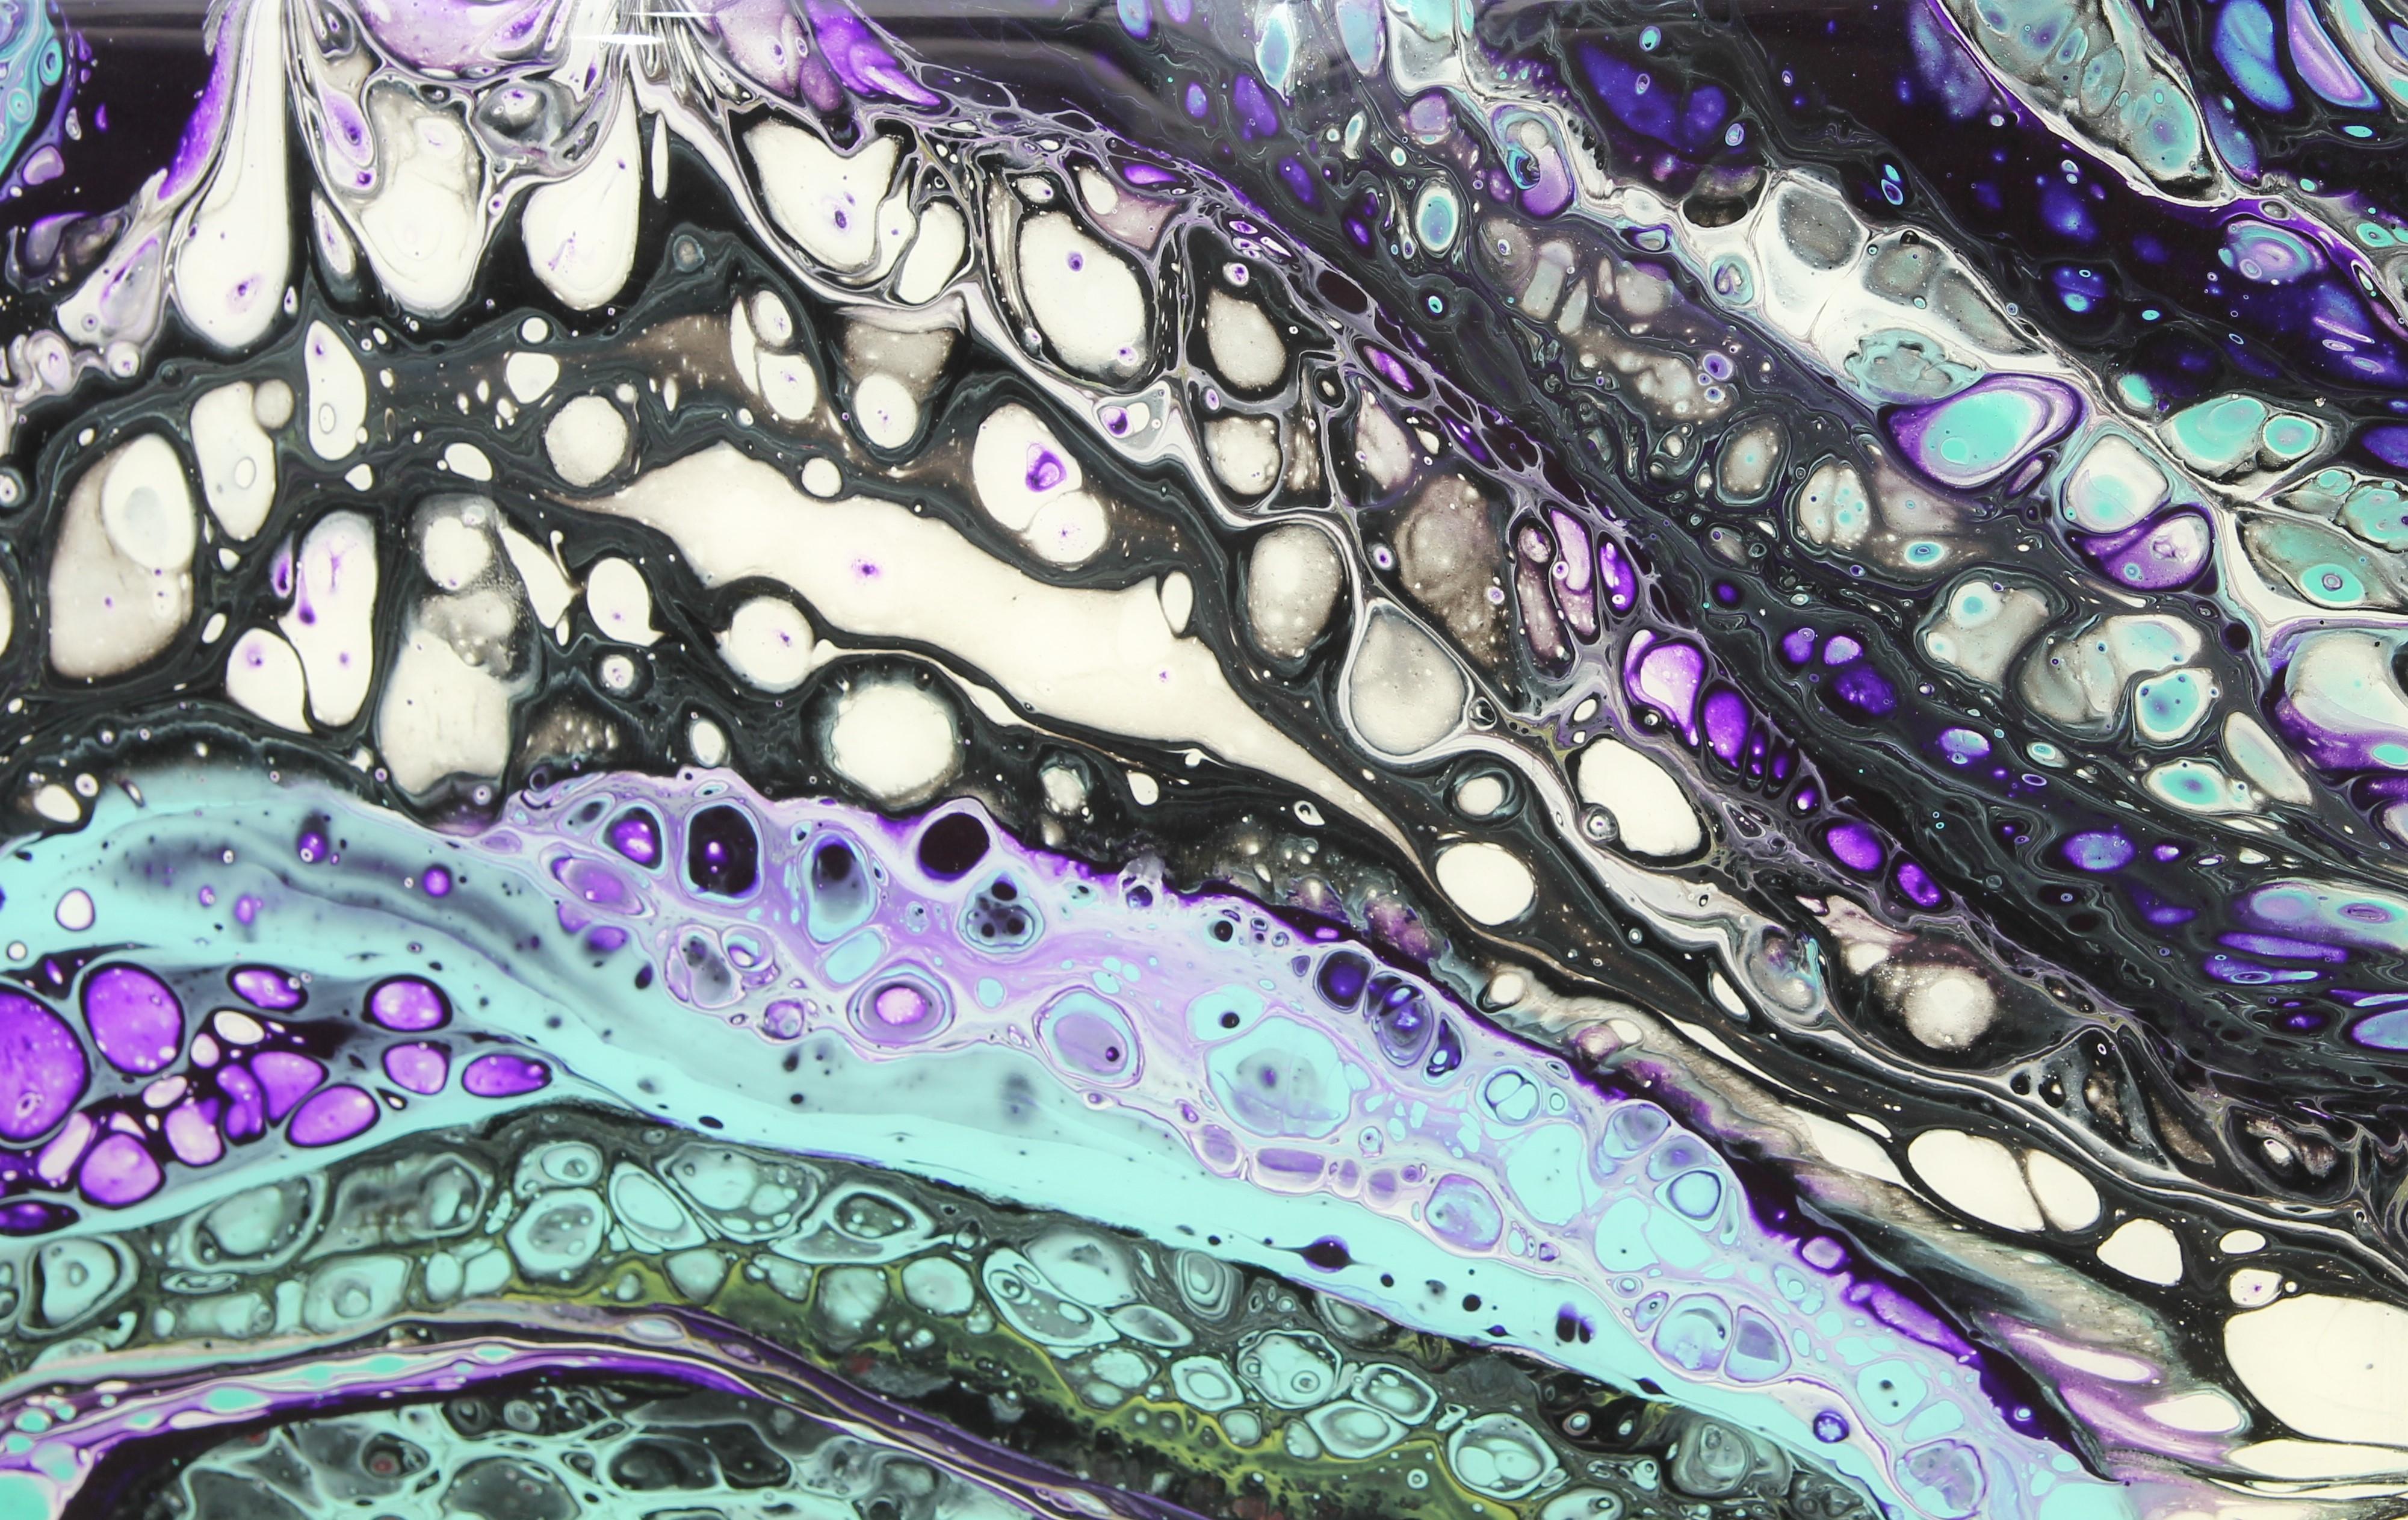 Colorful abstract acrylic fluid painting that incorporates hues of black, teal, purple and green. Signed and dated by the artist on the side of the piece.

Artist Biography: 